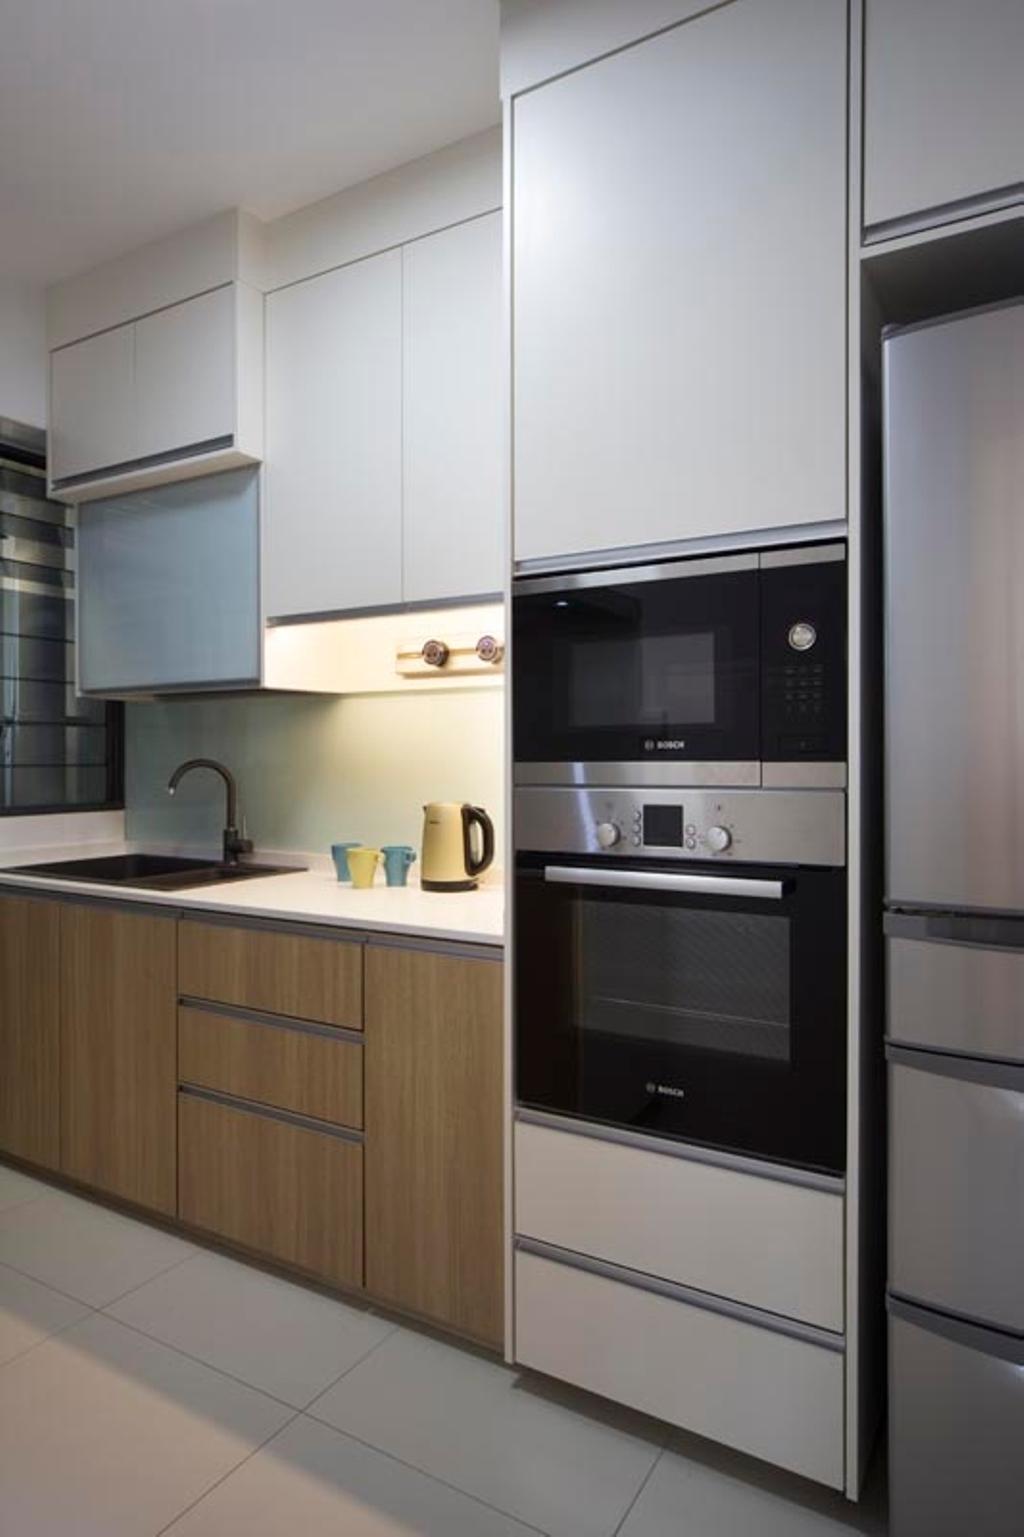 Transitional, HDB, Kitchen, Punggol Waterway Terraces (Block 310A), Interior Designer, Yonder, Oven, Sink, White Kitchen Cabinets, Dish Rack, Drawers, Appliance, Electrical Device